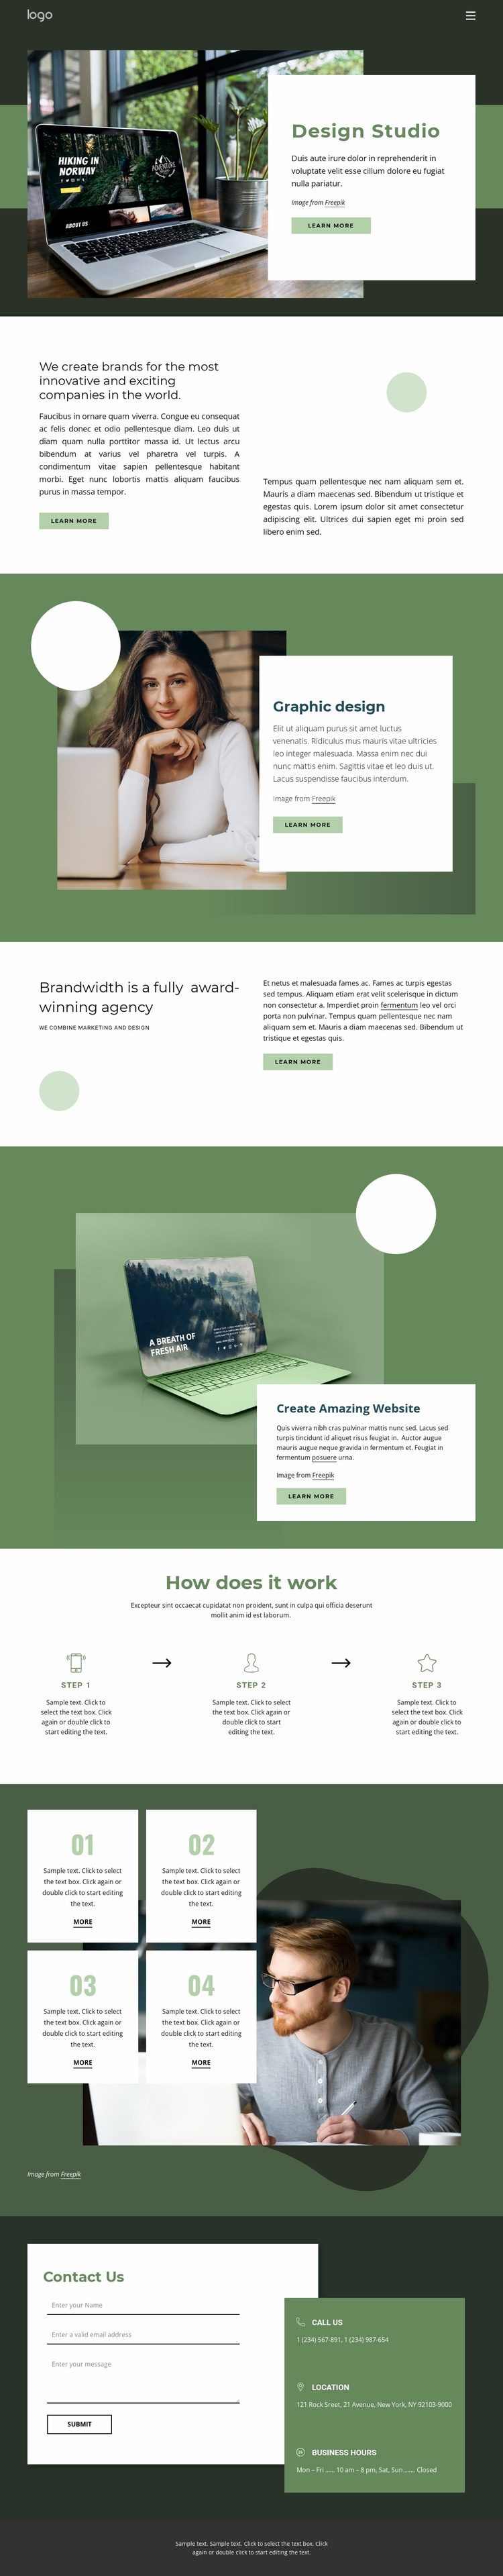 Design inspiration from nature Homepage Design